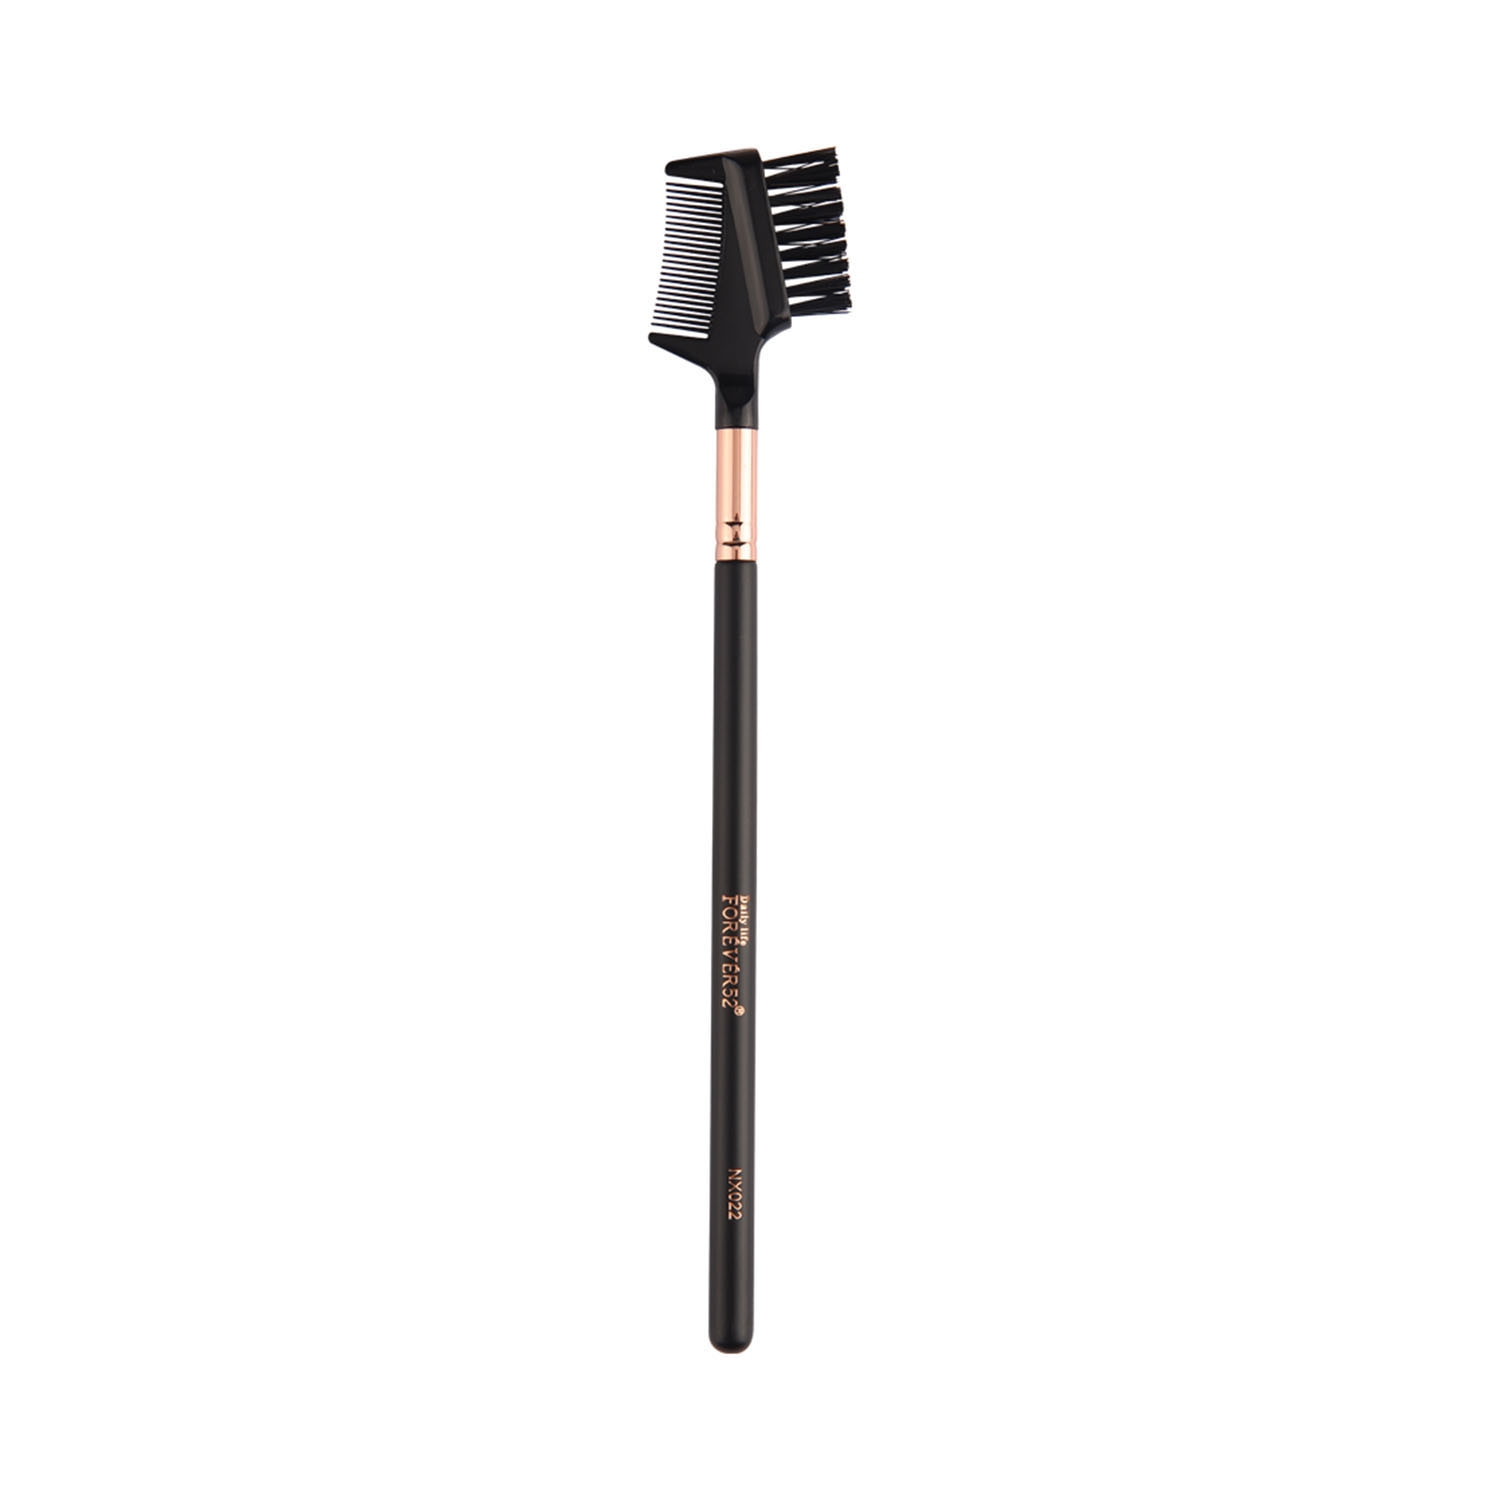 Daily Life Forever52 | Daily Life Forever52 Comb Brush - NX022 (1Pc)